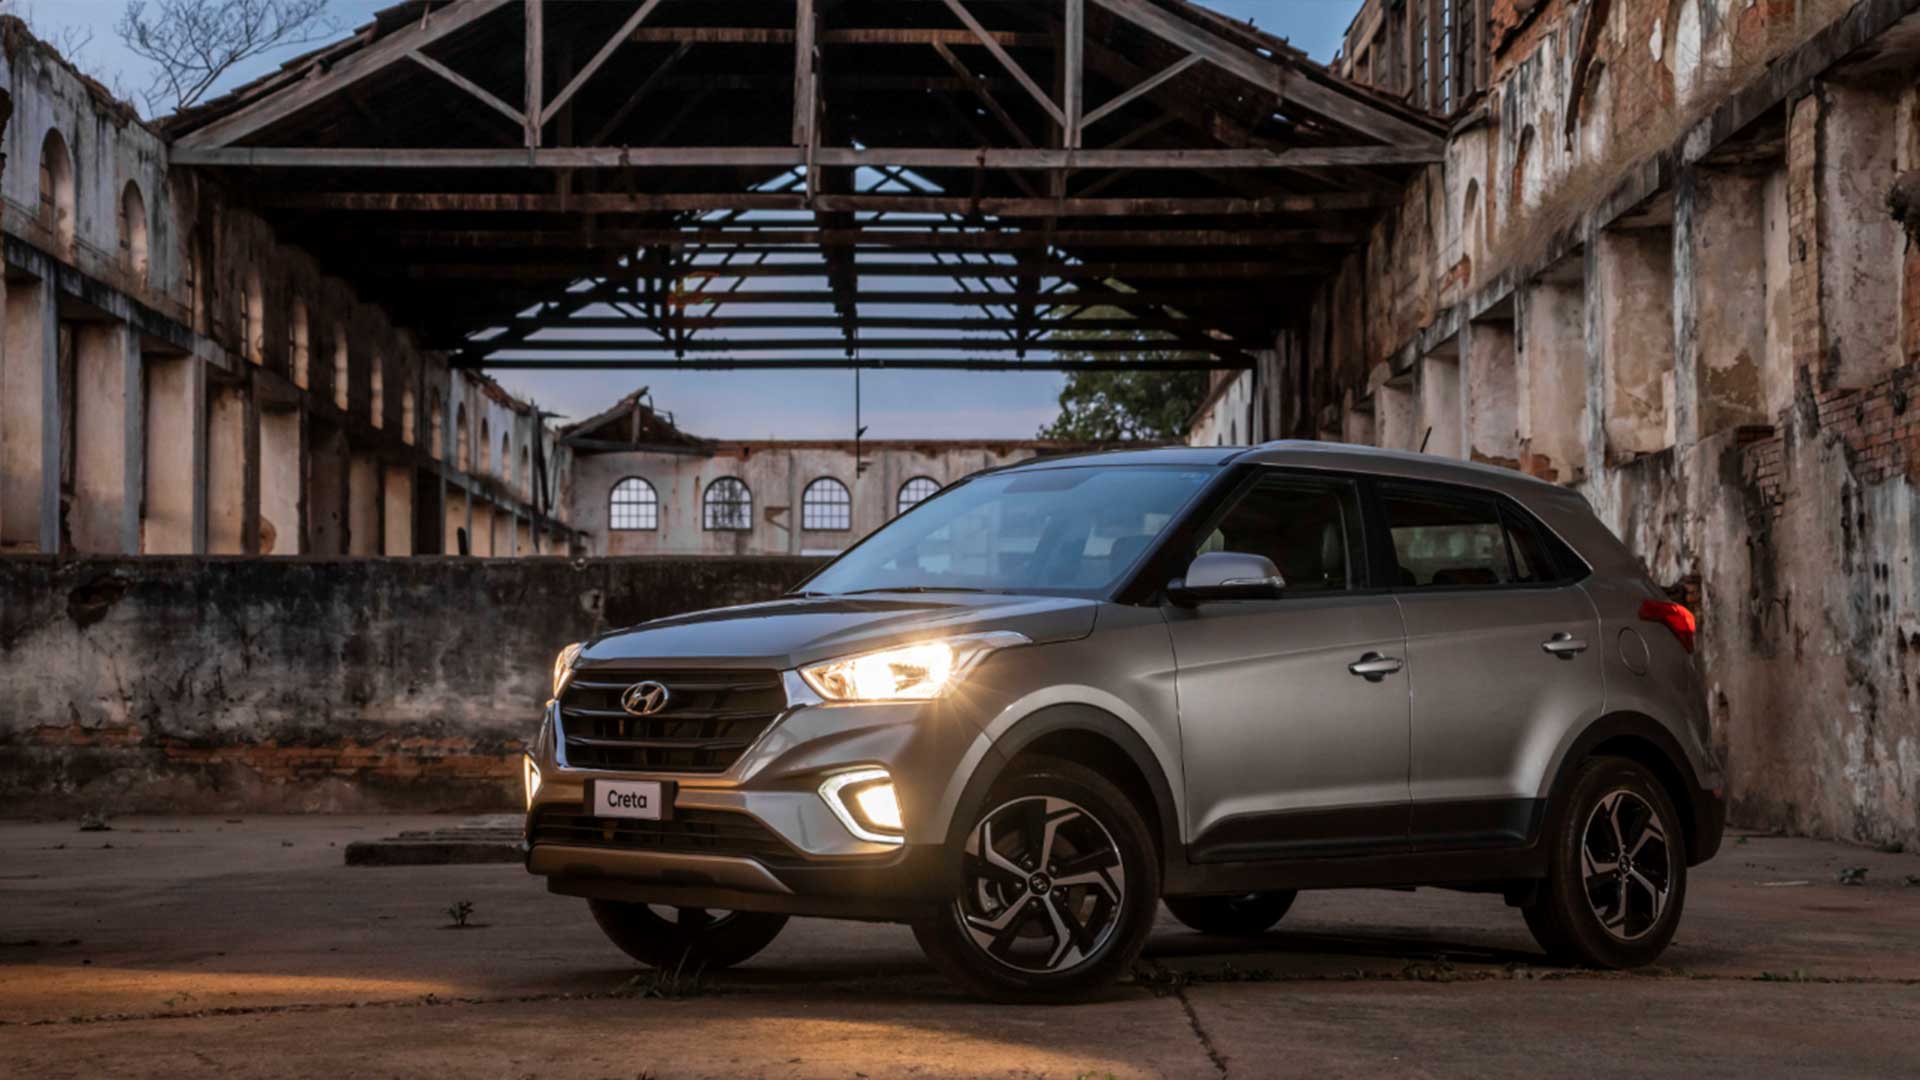 Creta Smart Plus is the new version of the compact SUV from Hyundai